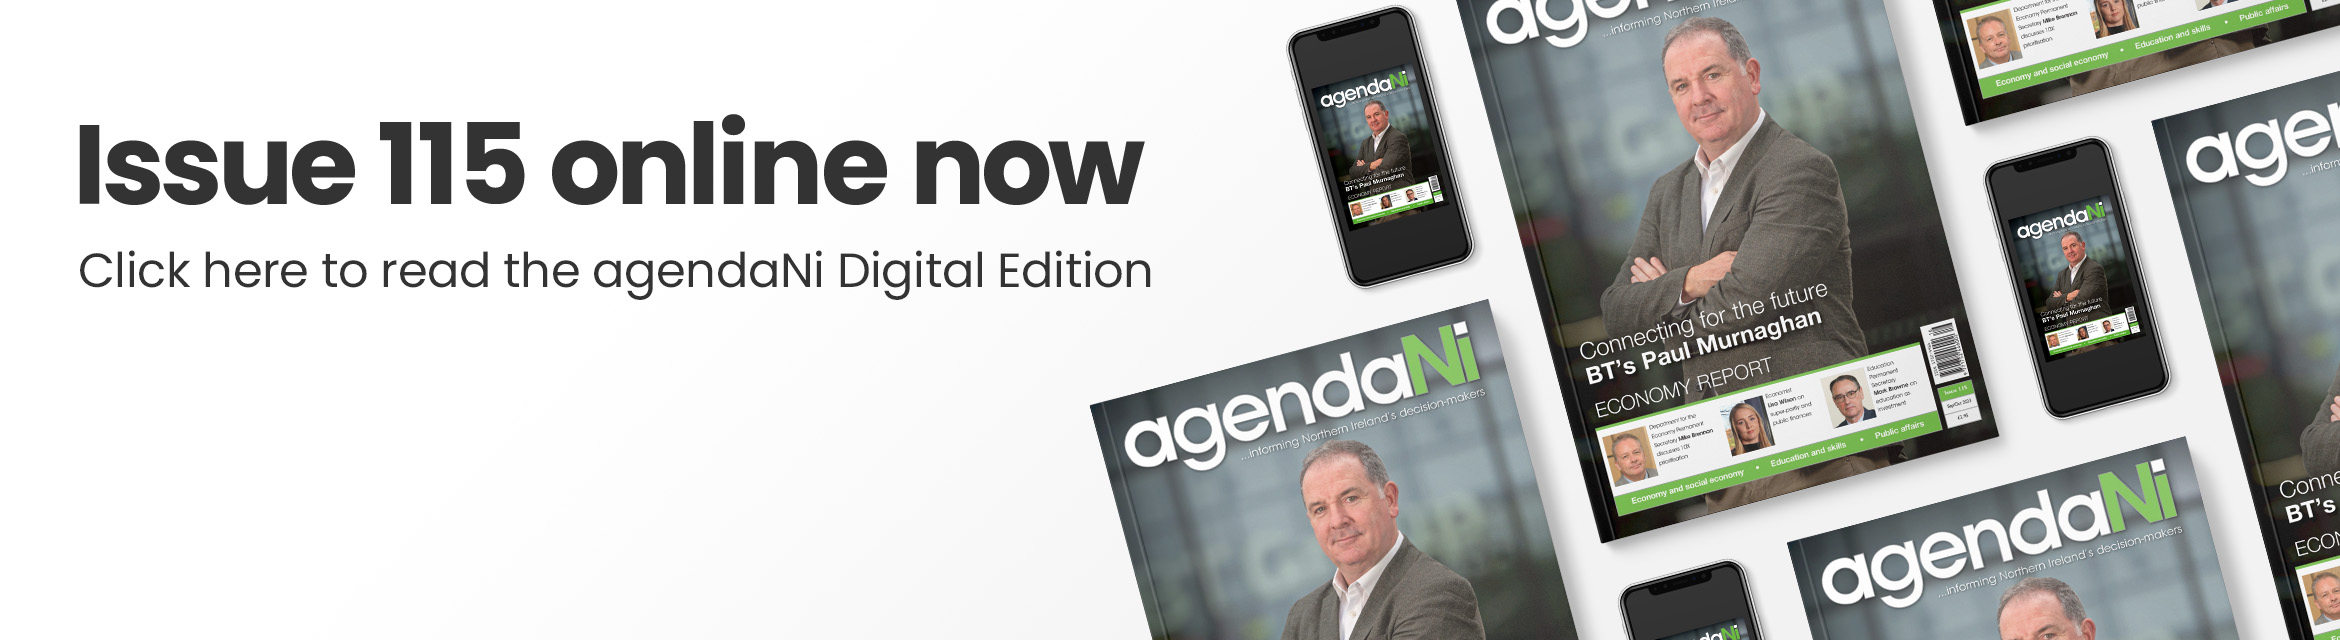 Issue 115 online now. Click here to read the agendaNi Digital Edition.